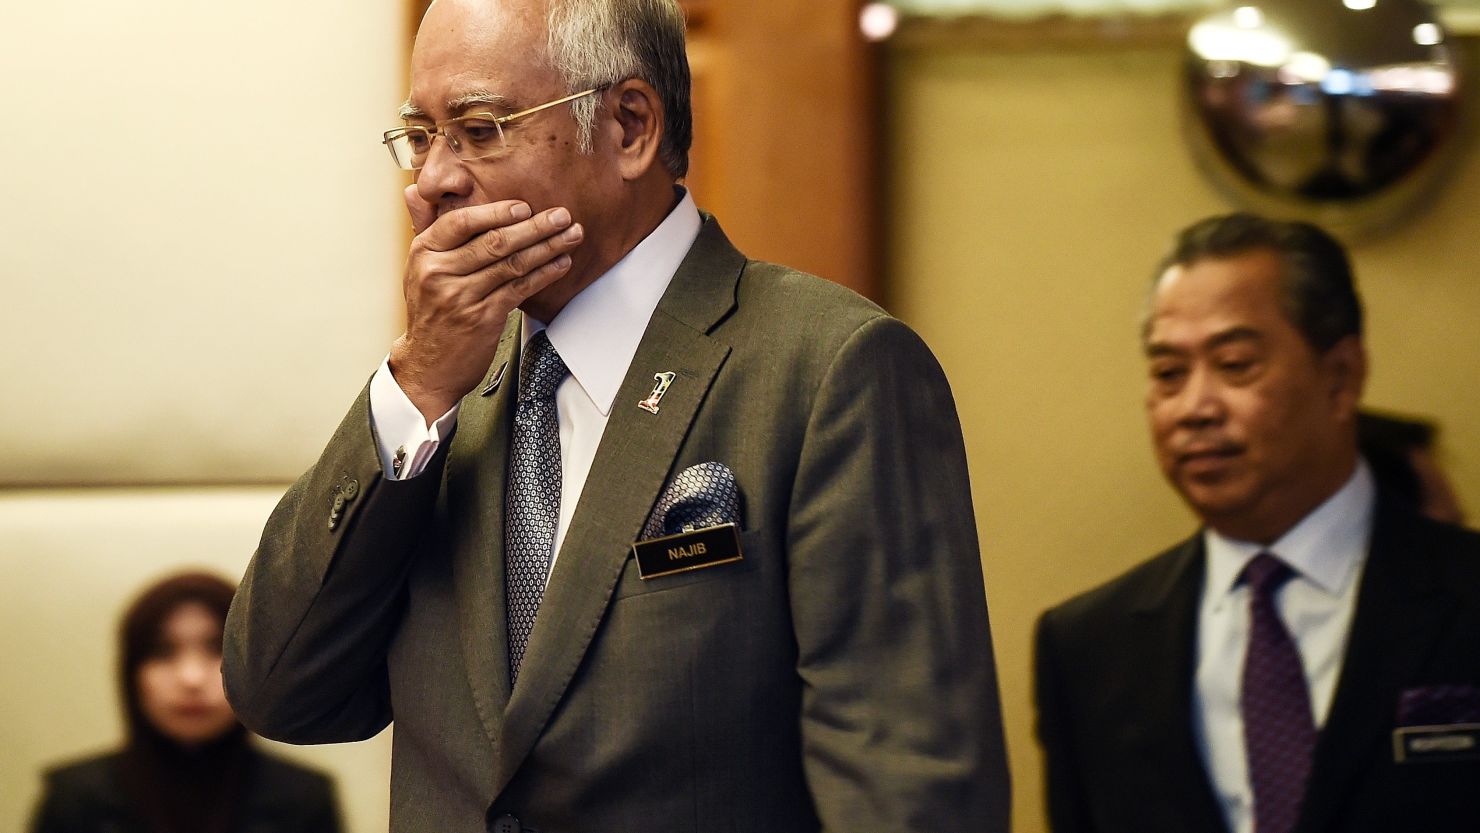 Embattled Malaysian Prime Minister Najib Razak (L) gestures as he arrives along with Deputy Prime Minister Muhyiddin Yassin (R) to take part in an event for new government interns at the Prime Minister's office in Putrajaya in this photo taken July 28, 2015.